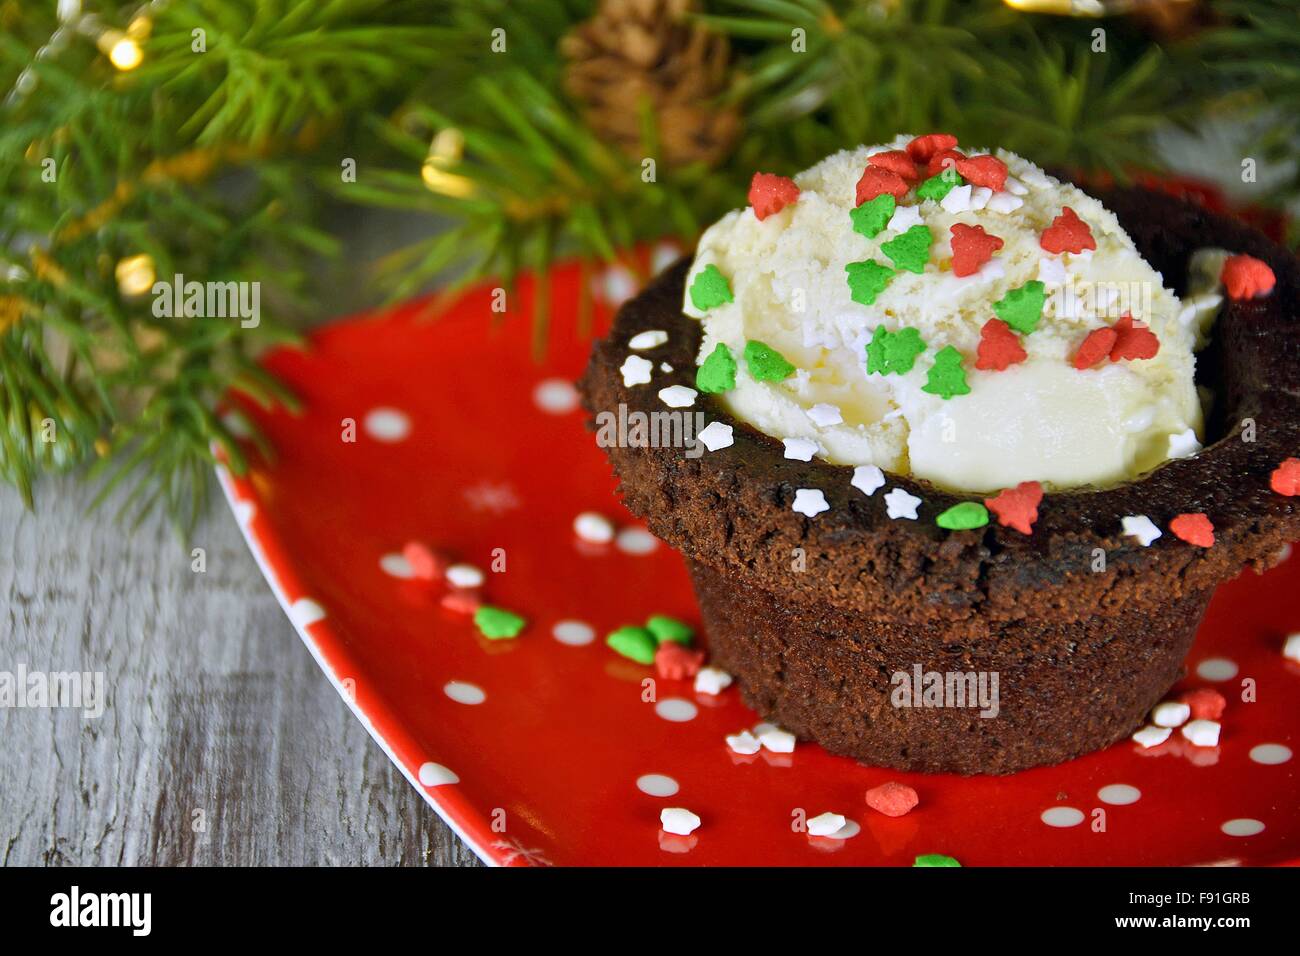 Christmas candy sprinkles on vanilla ice cream in brownie cup on red plate with holiday decorations. Stock Photo